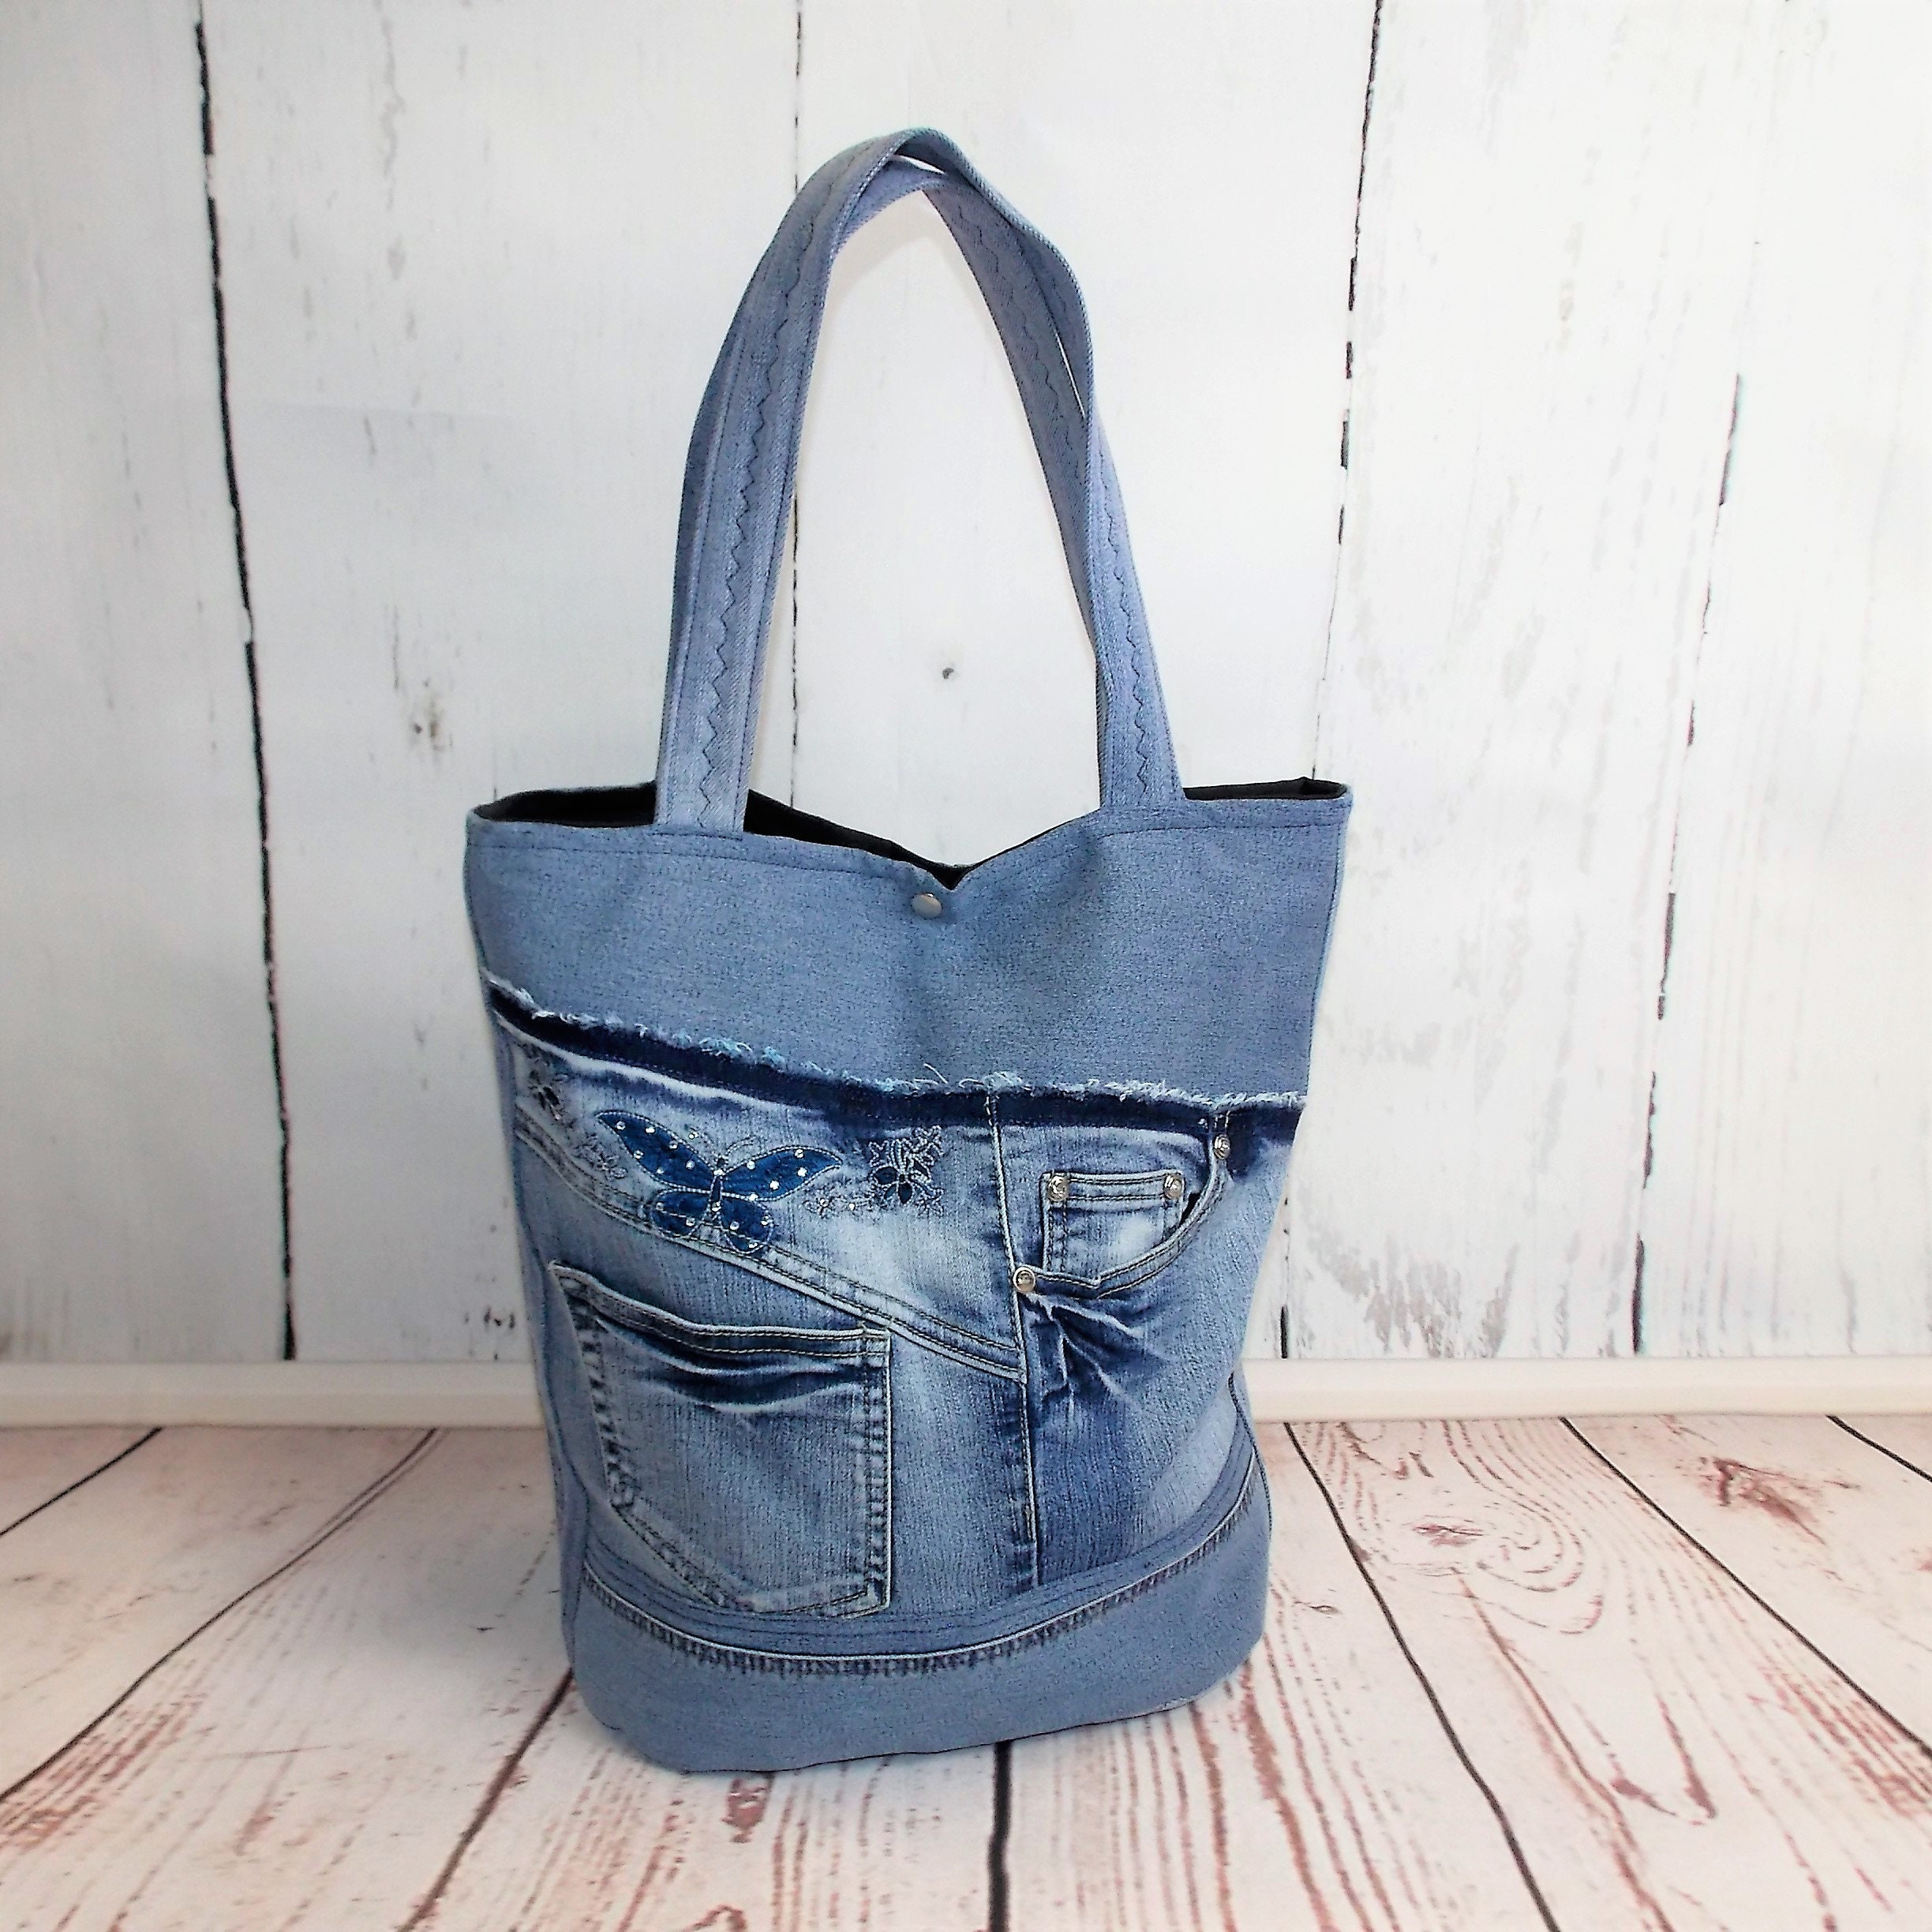 Shopper shopping bag jeans upcycling recycling | Etsy